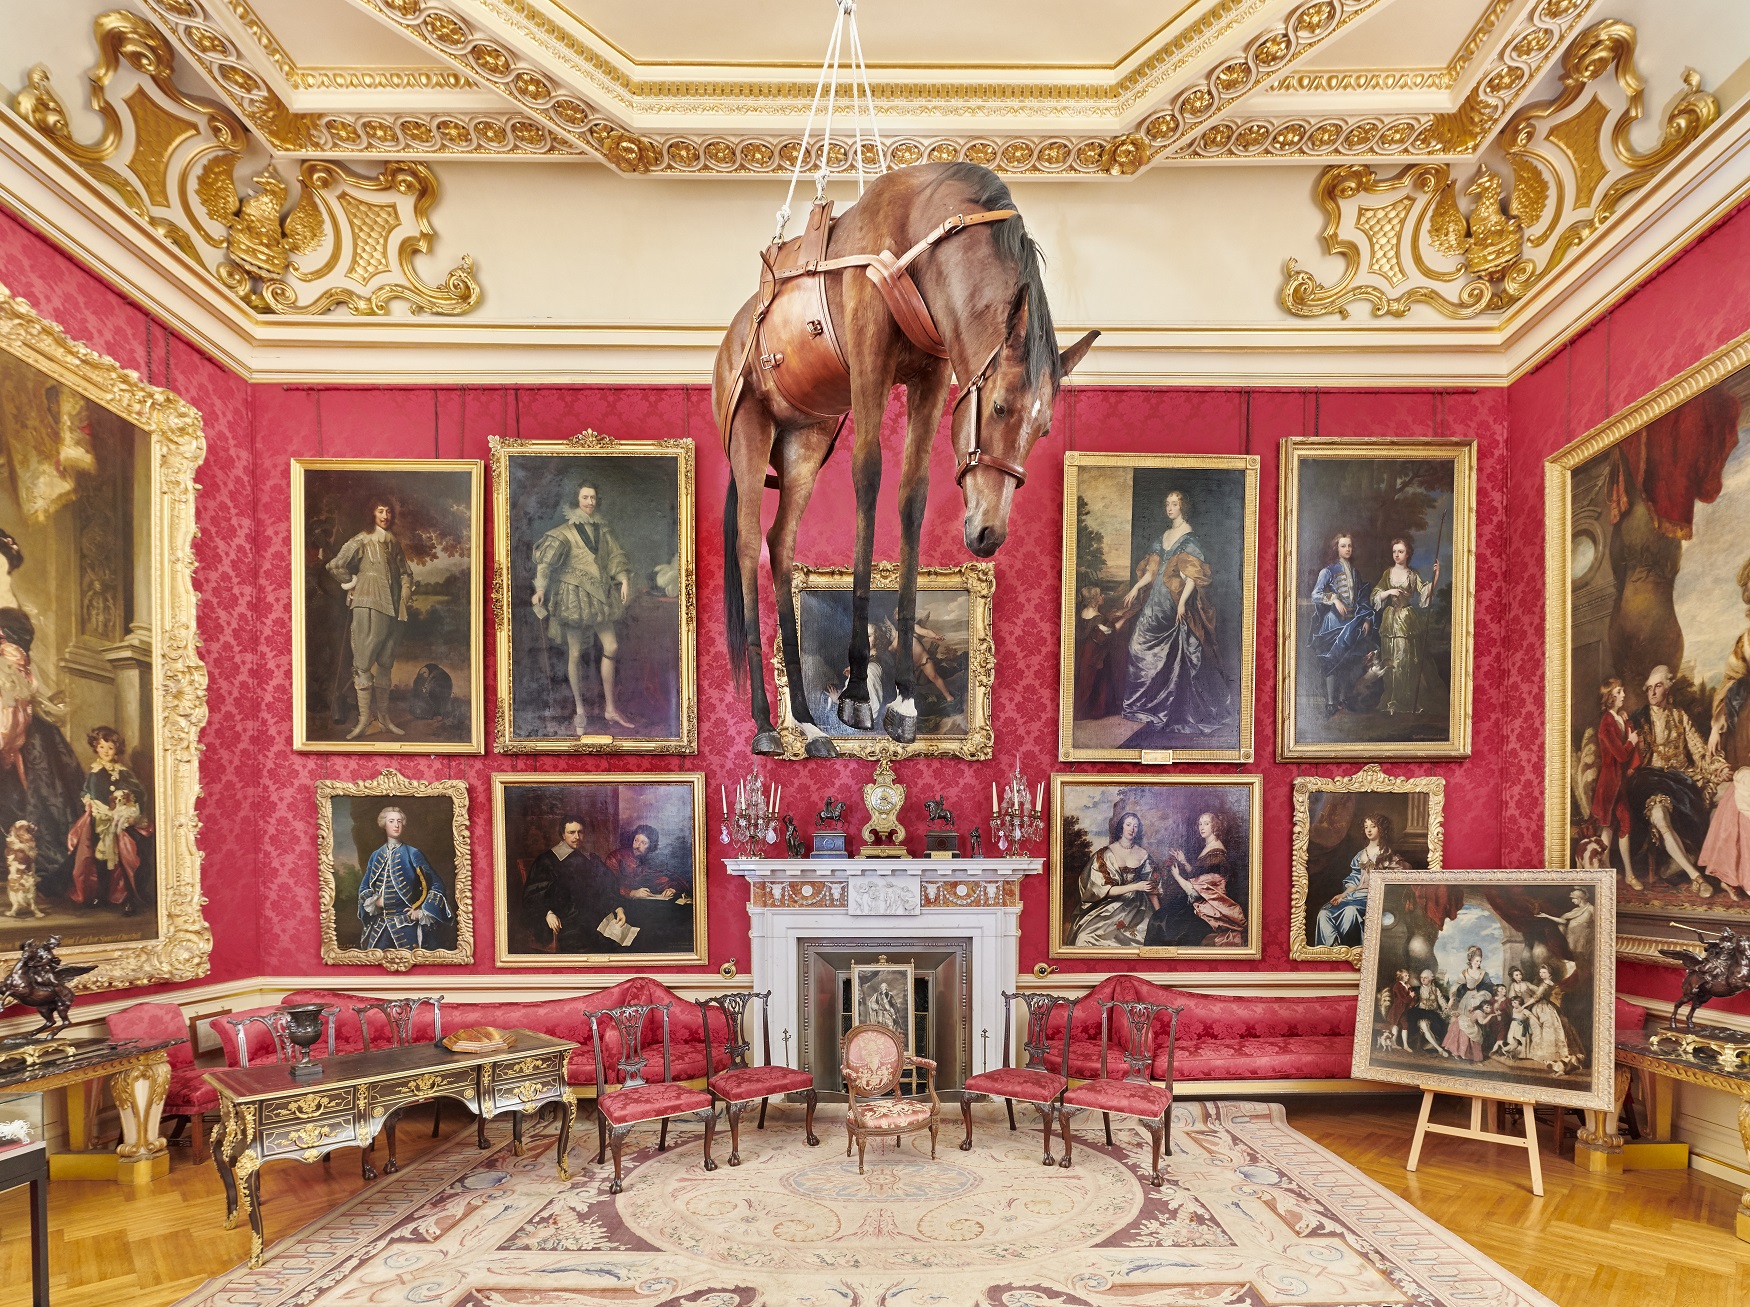 Installation view, Novecento, Victory is Not an Option, Maurizio Cattelan at Blenheim Palace, 2019, photo by Tom Lindboe, courtesy of Blenheim Art Foundation